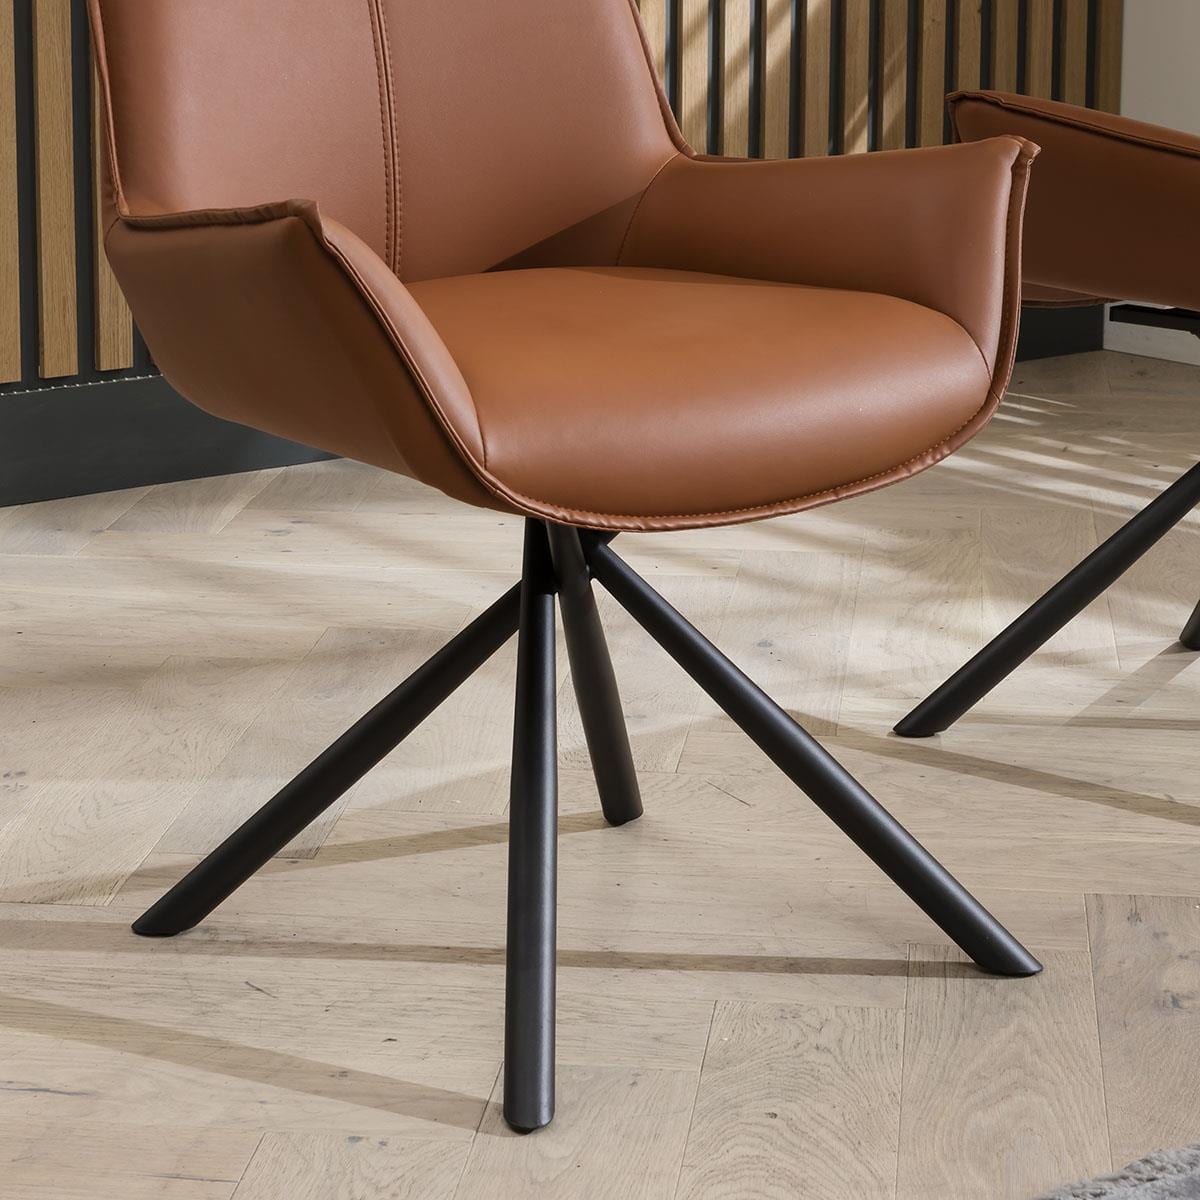 Quatropi Set of 2 Modern Swivel Dining Chairs with Arms in Premium Tan Faux Leather